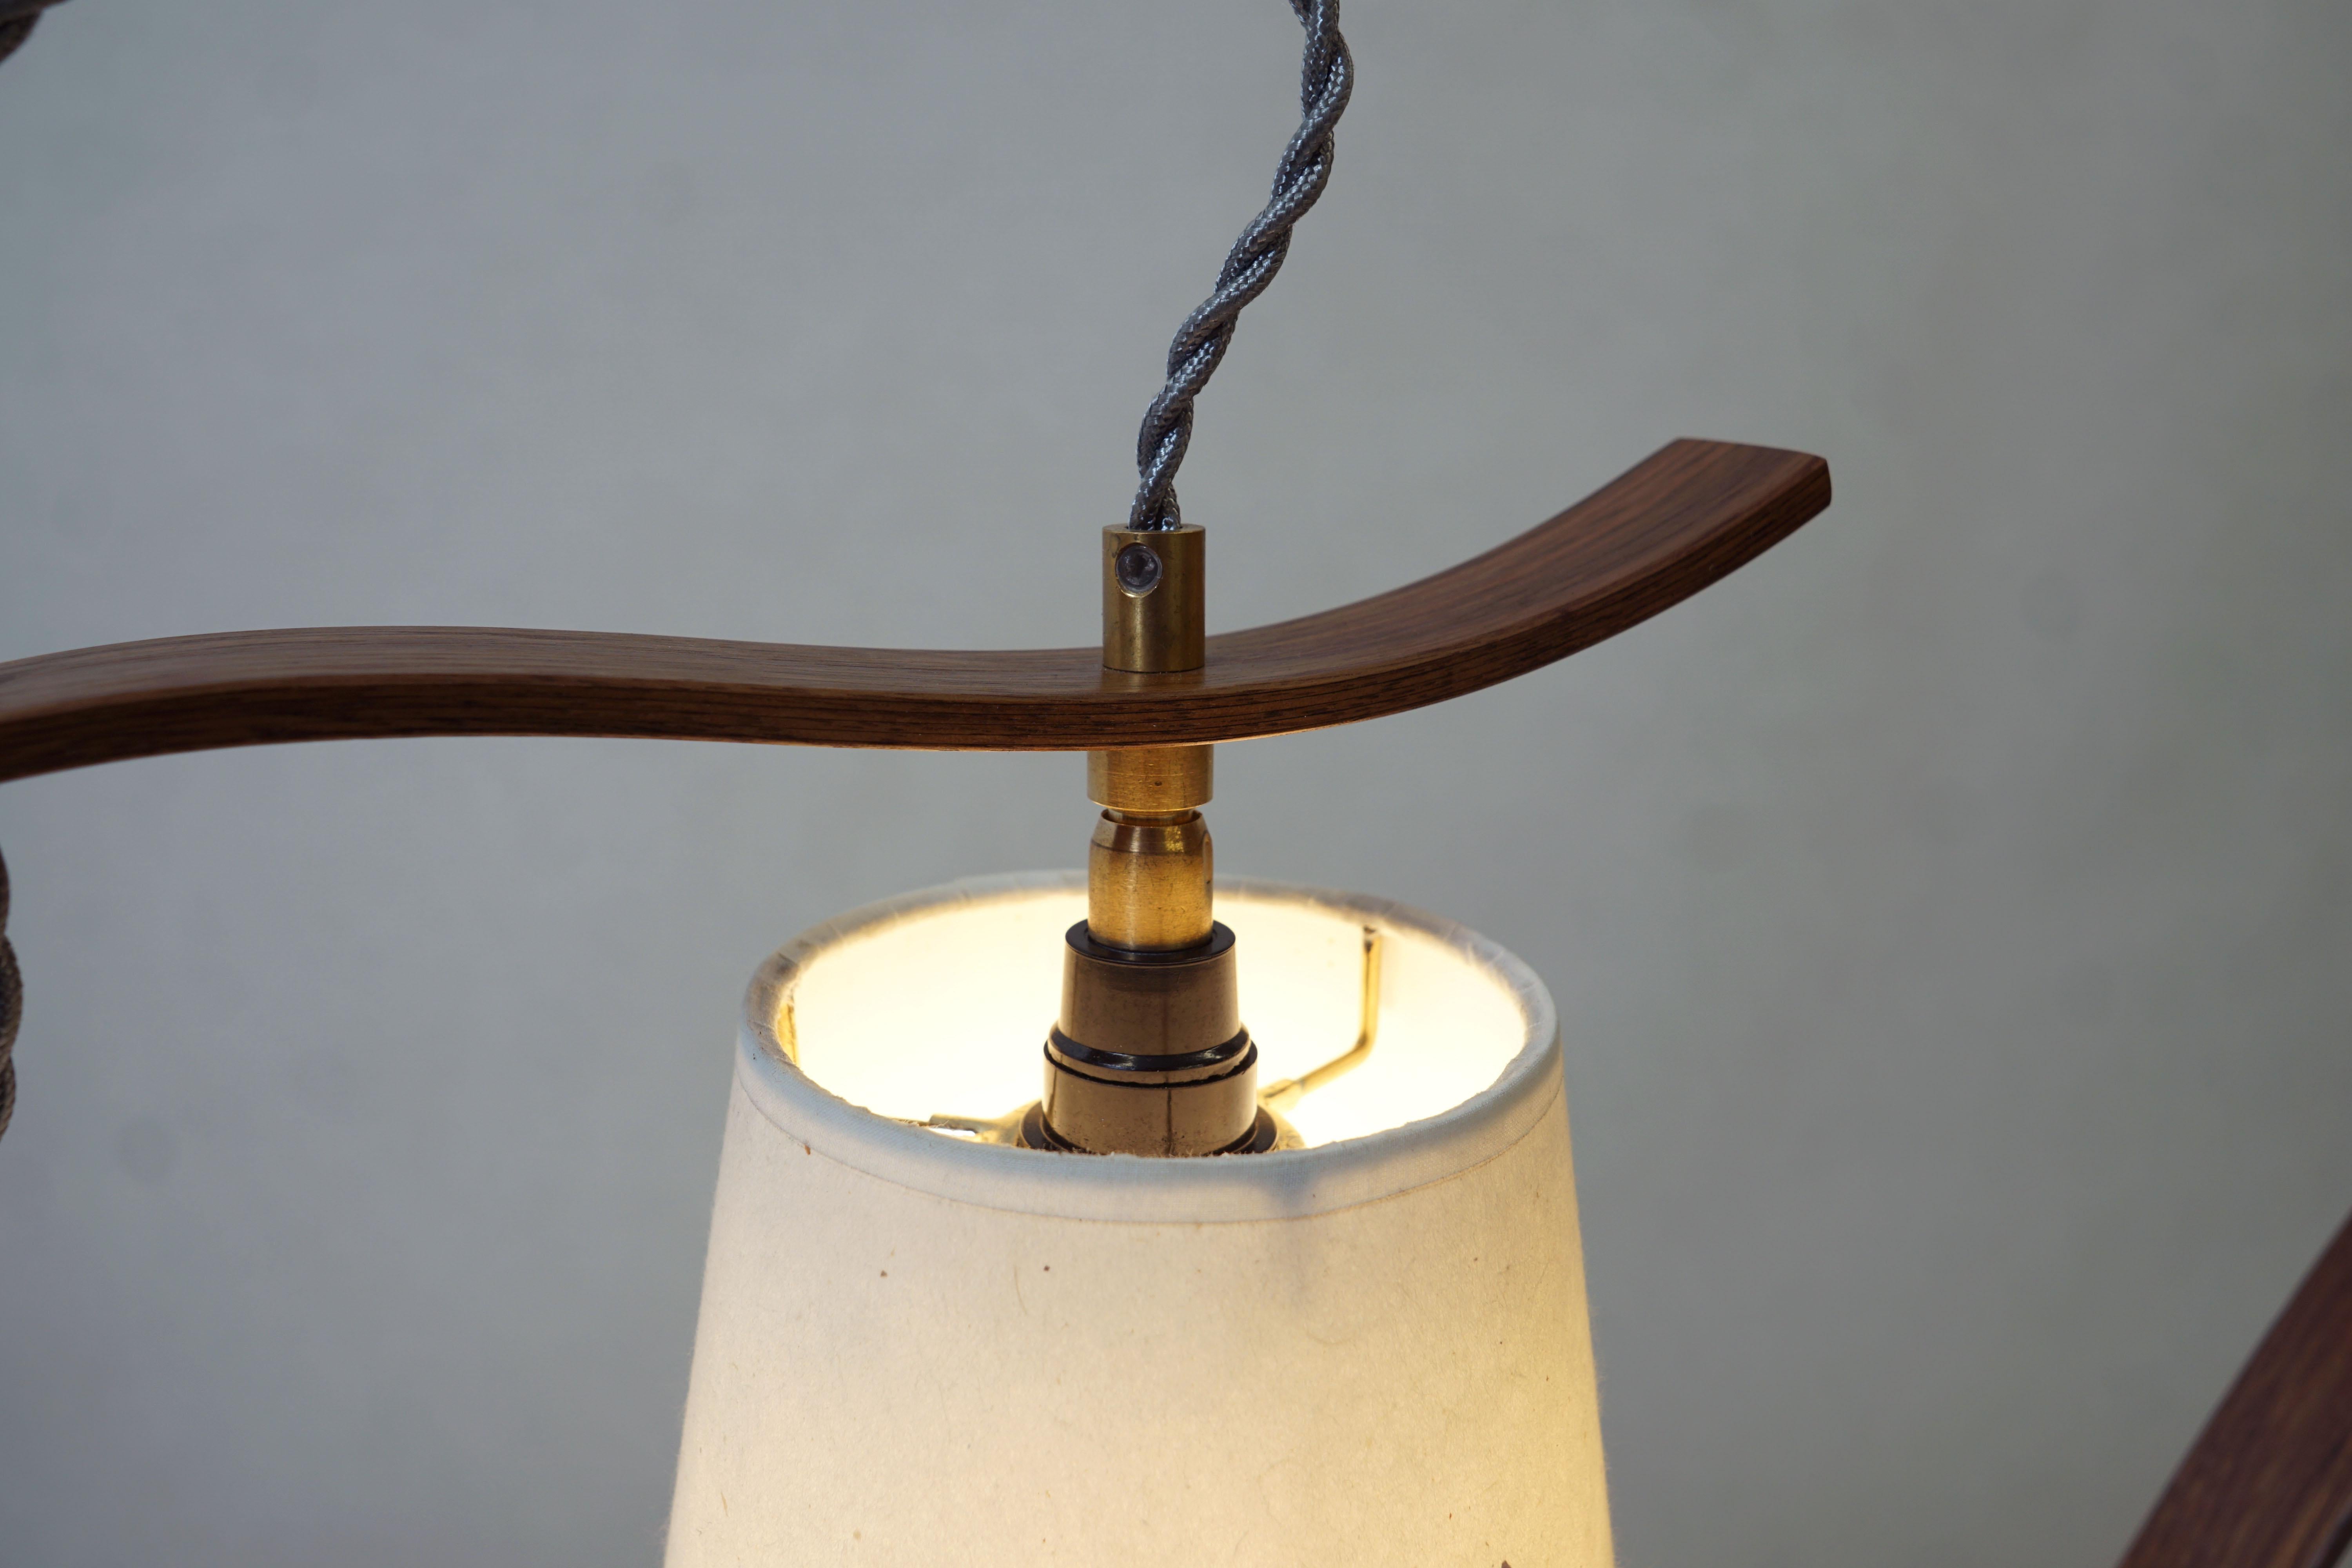 Hand-Crafted Curved Table Lamp Sculpture, Handcrafted in Walnut Wood with Walnut Base For Sale